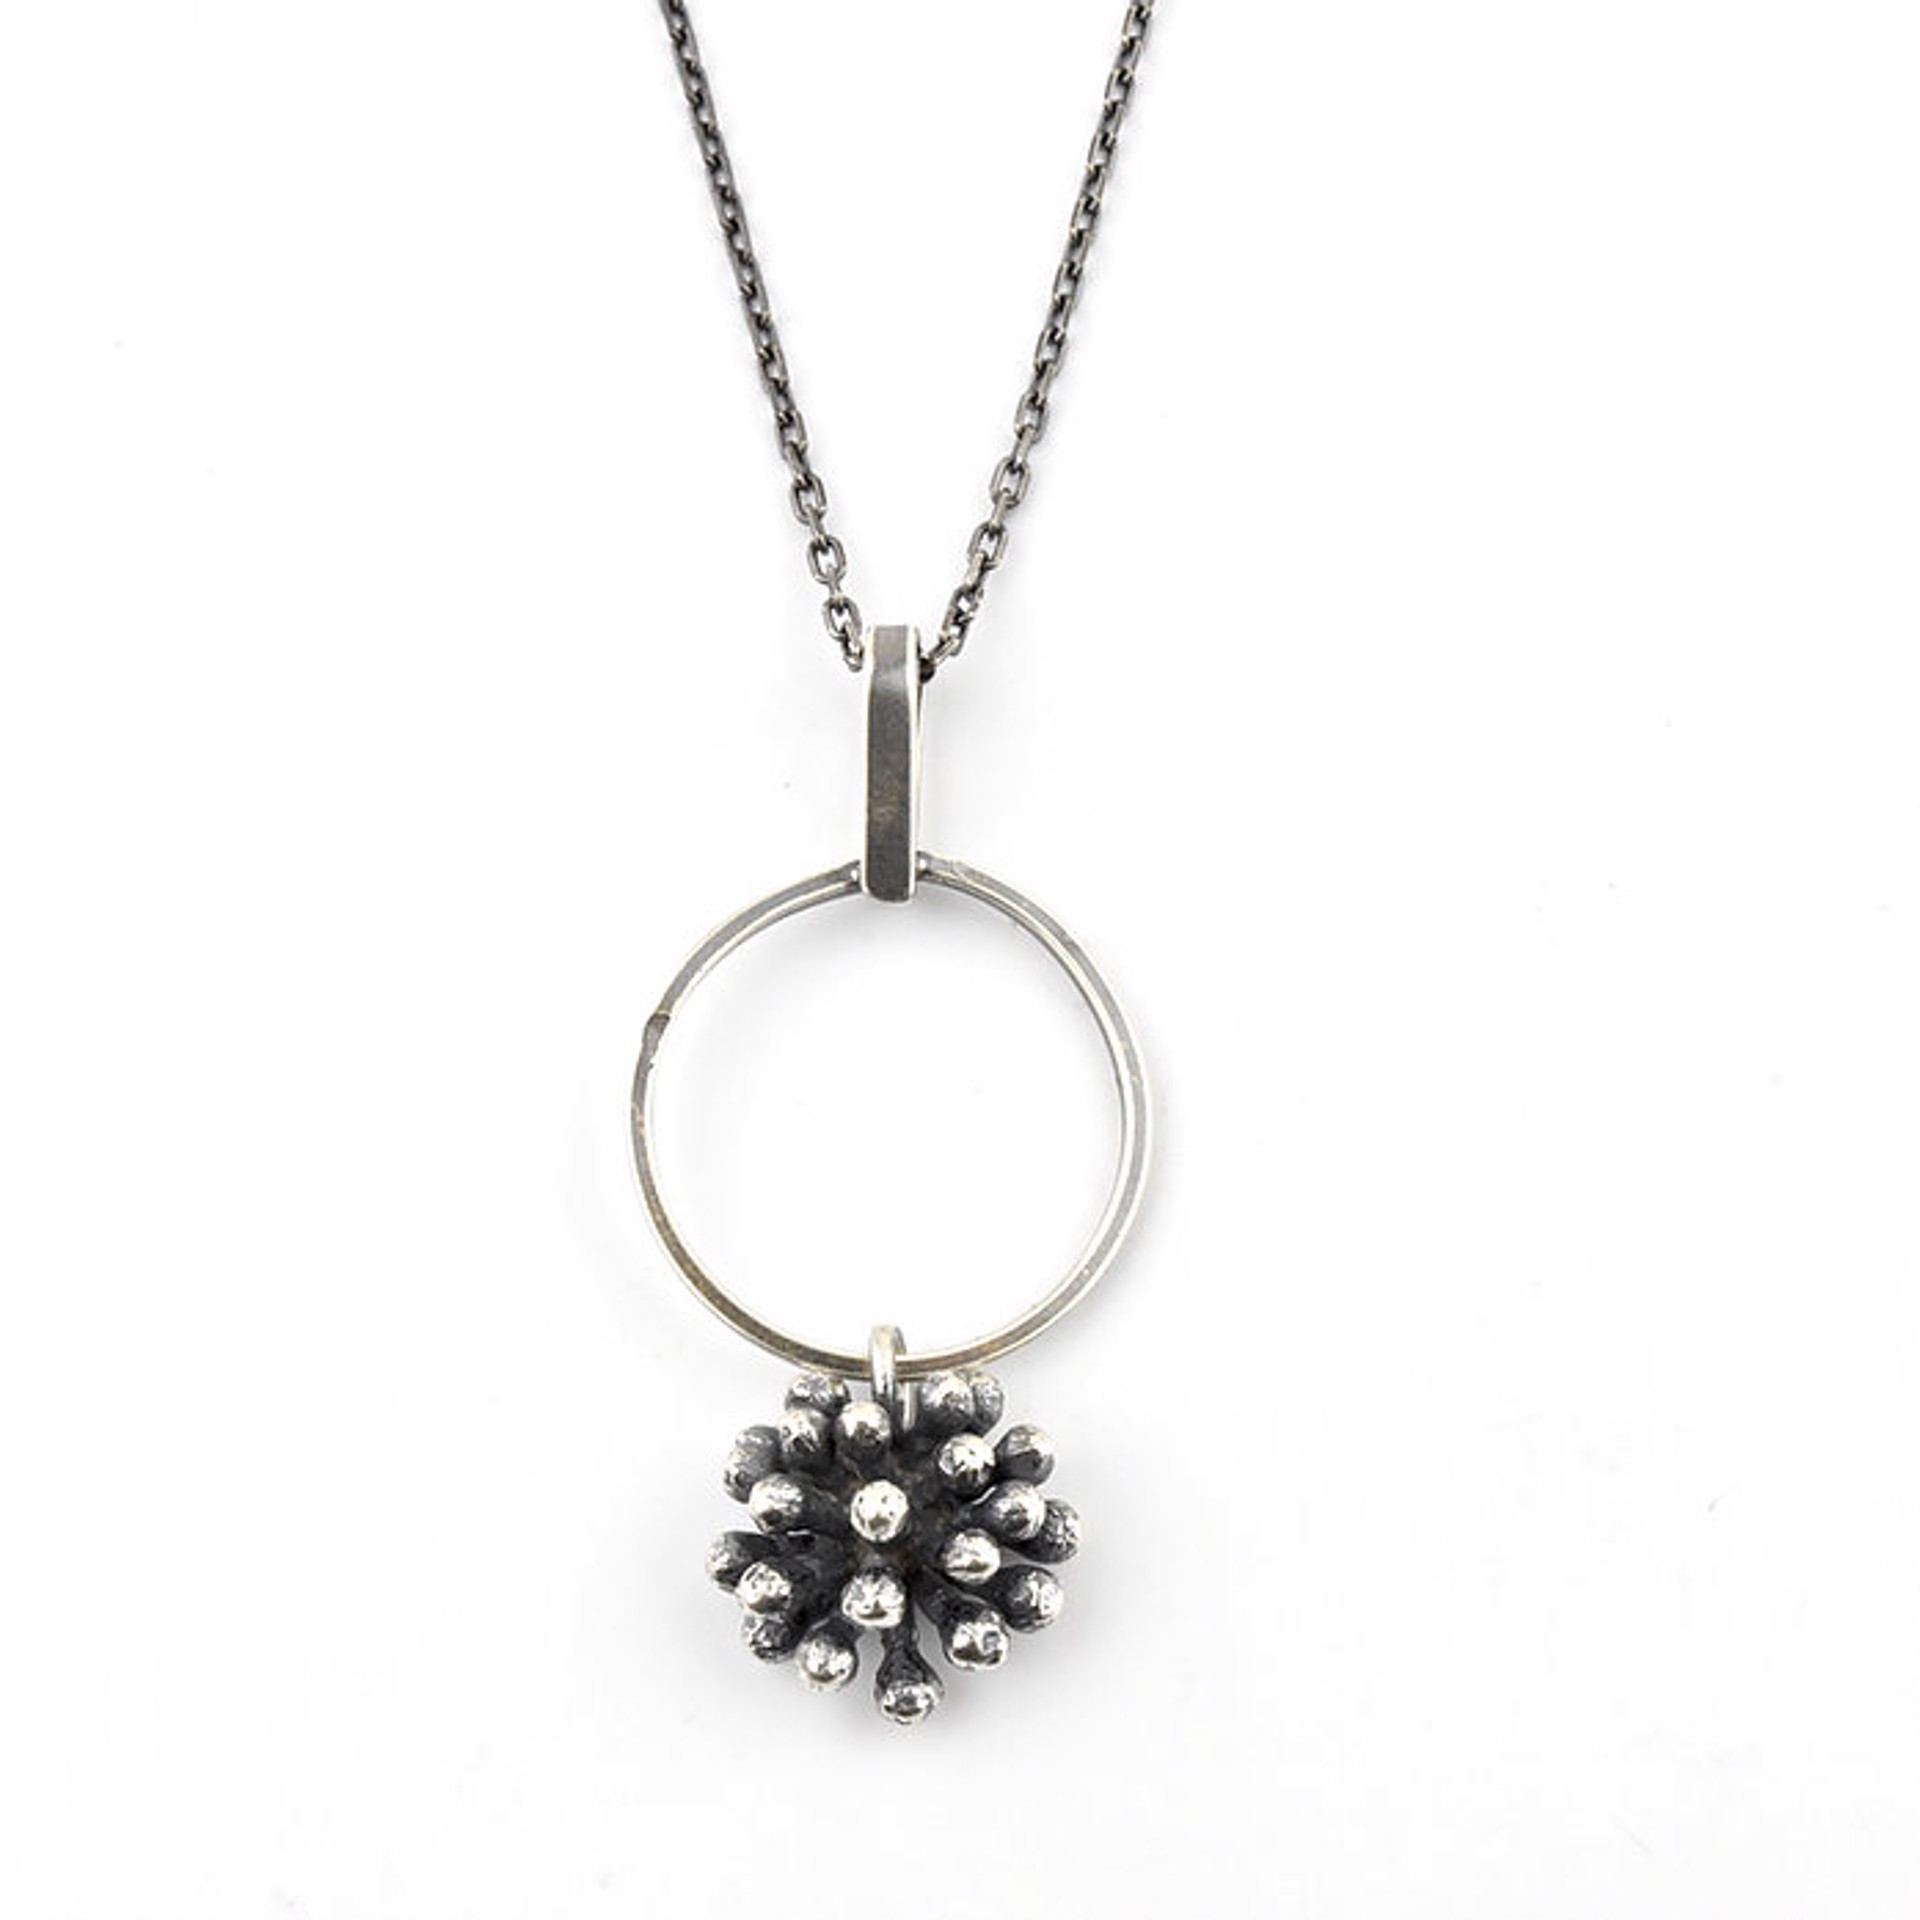 Mimosa Blossom Necklace by April Ottey